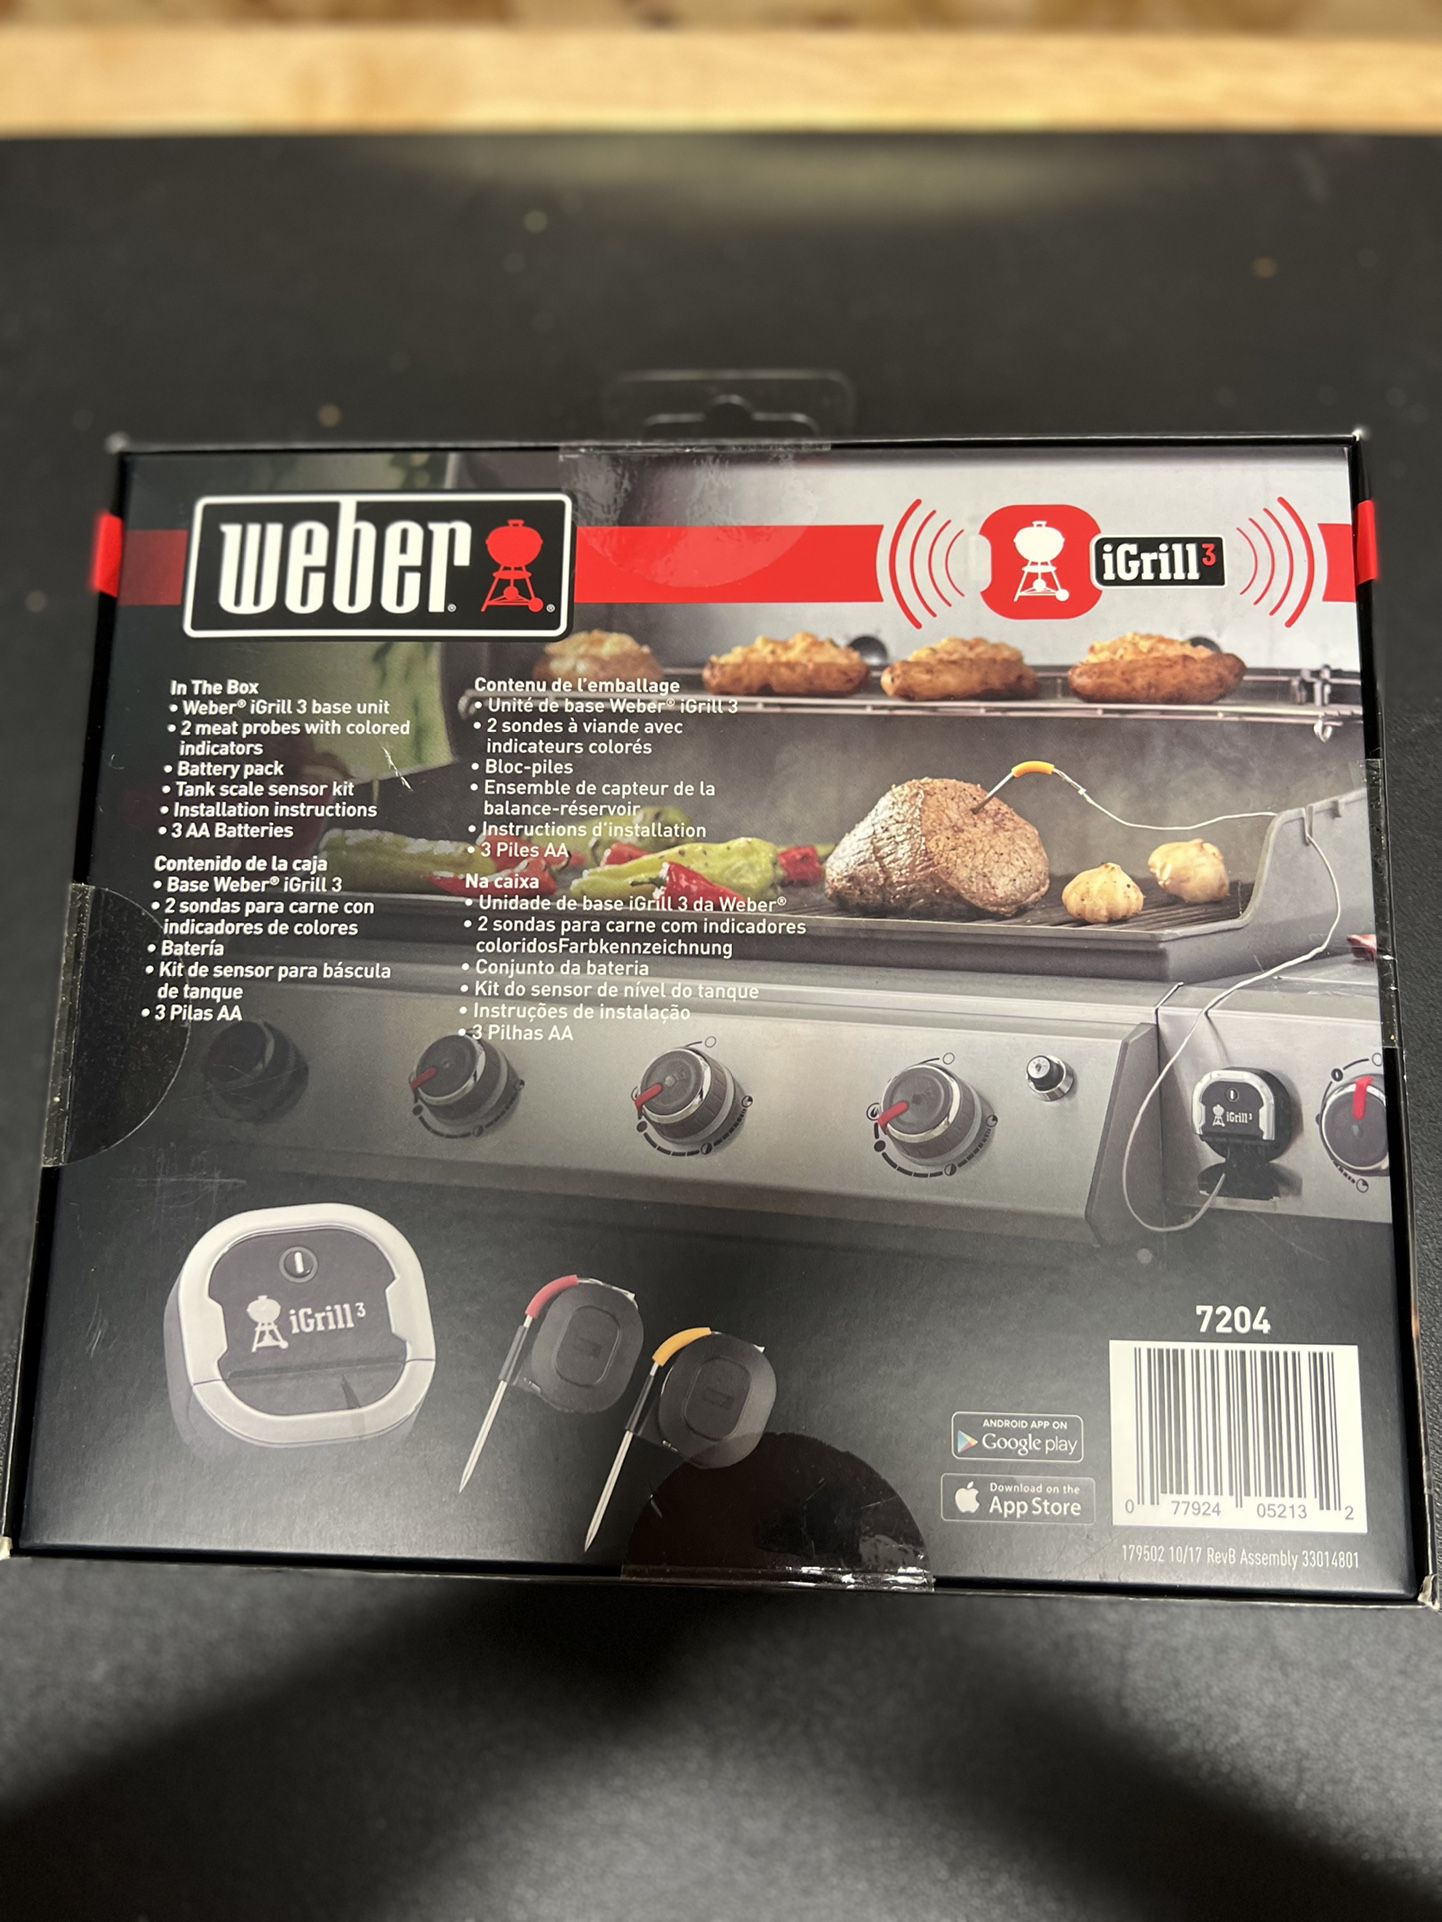 Weber iGrill 3 Grill Thermometer - used 7204